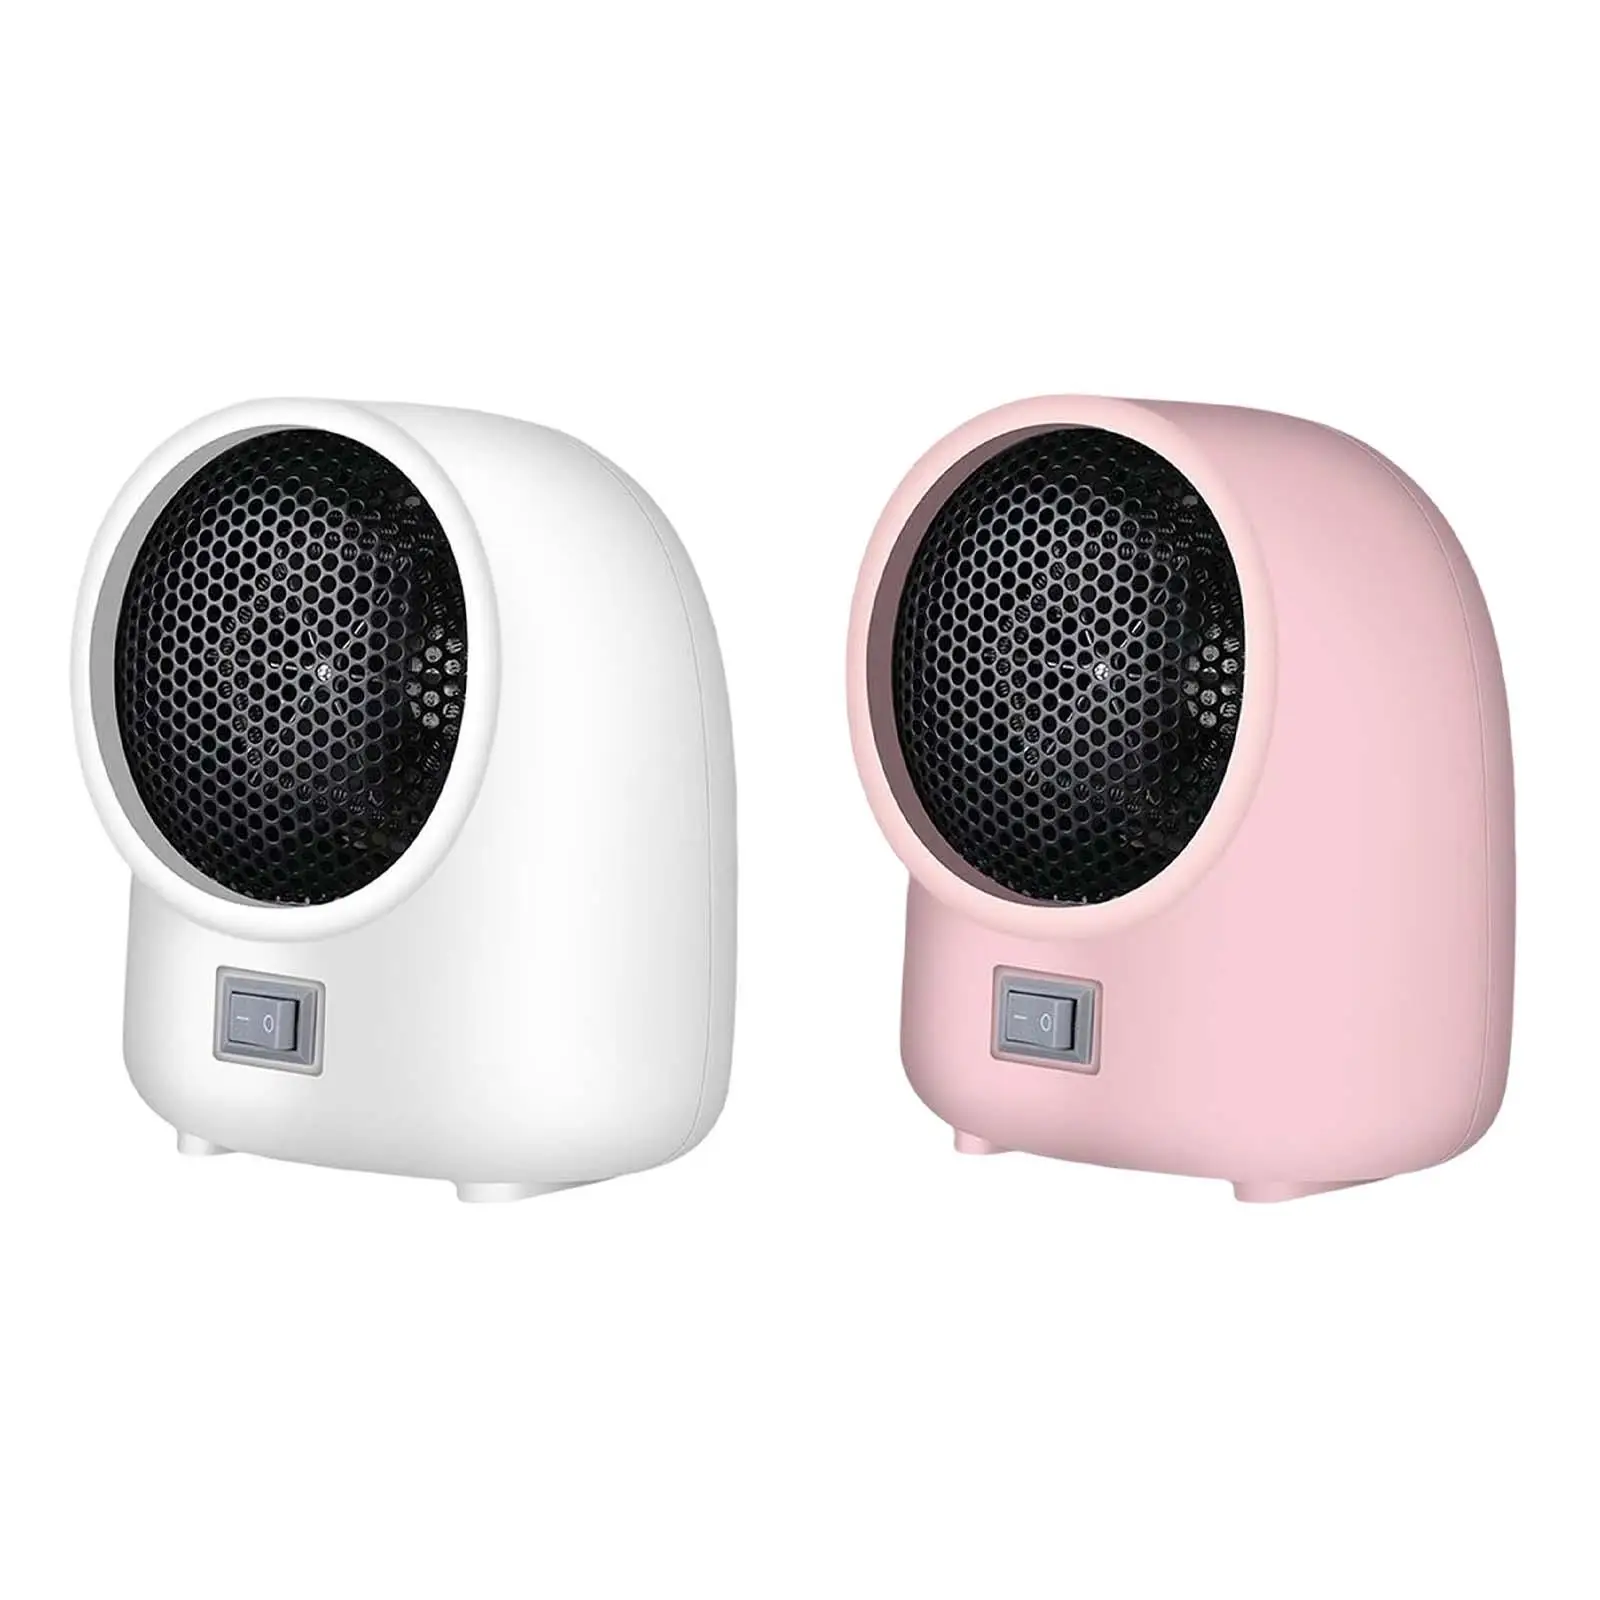 Electric 350-400W Quiet Convection Heating Mechanically Compact Fast Heating Mini Space Heater for Indoor Living Room Table Home